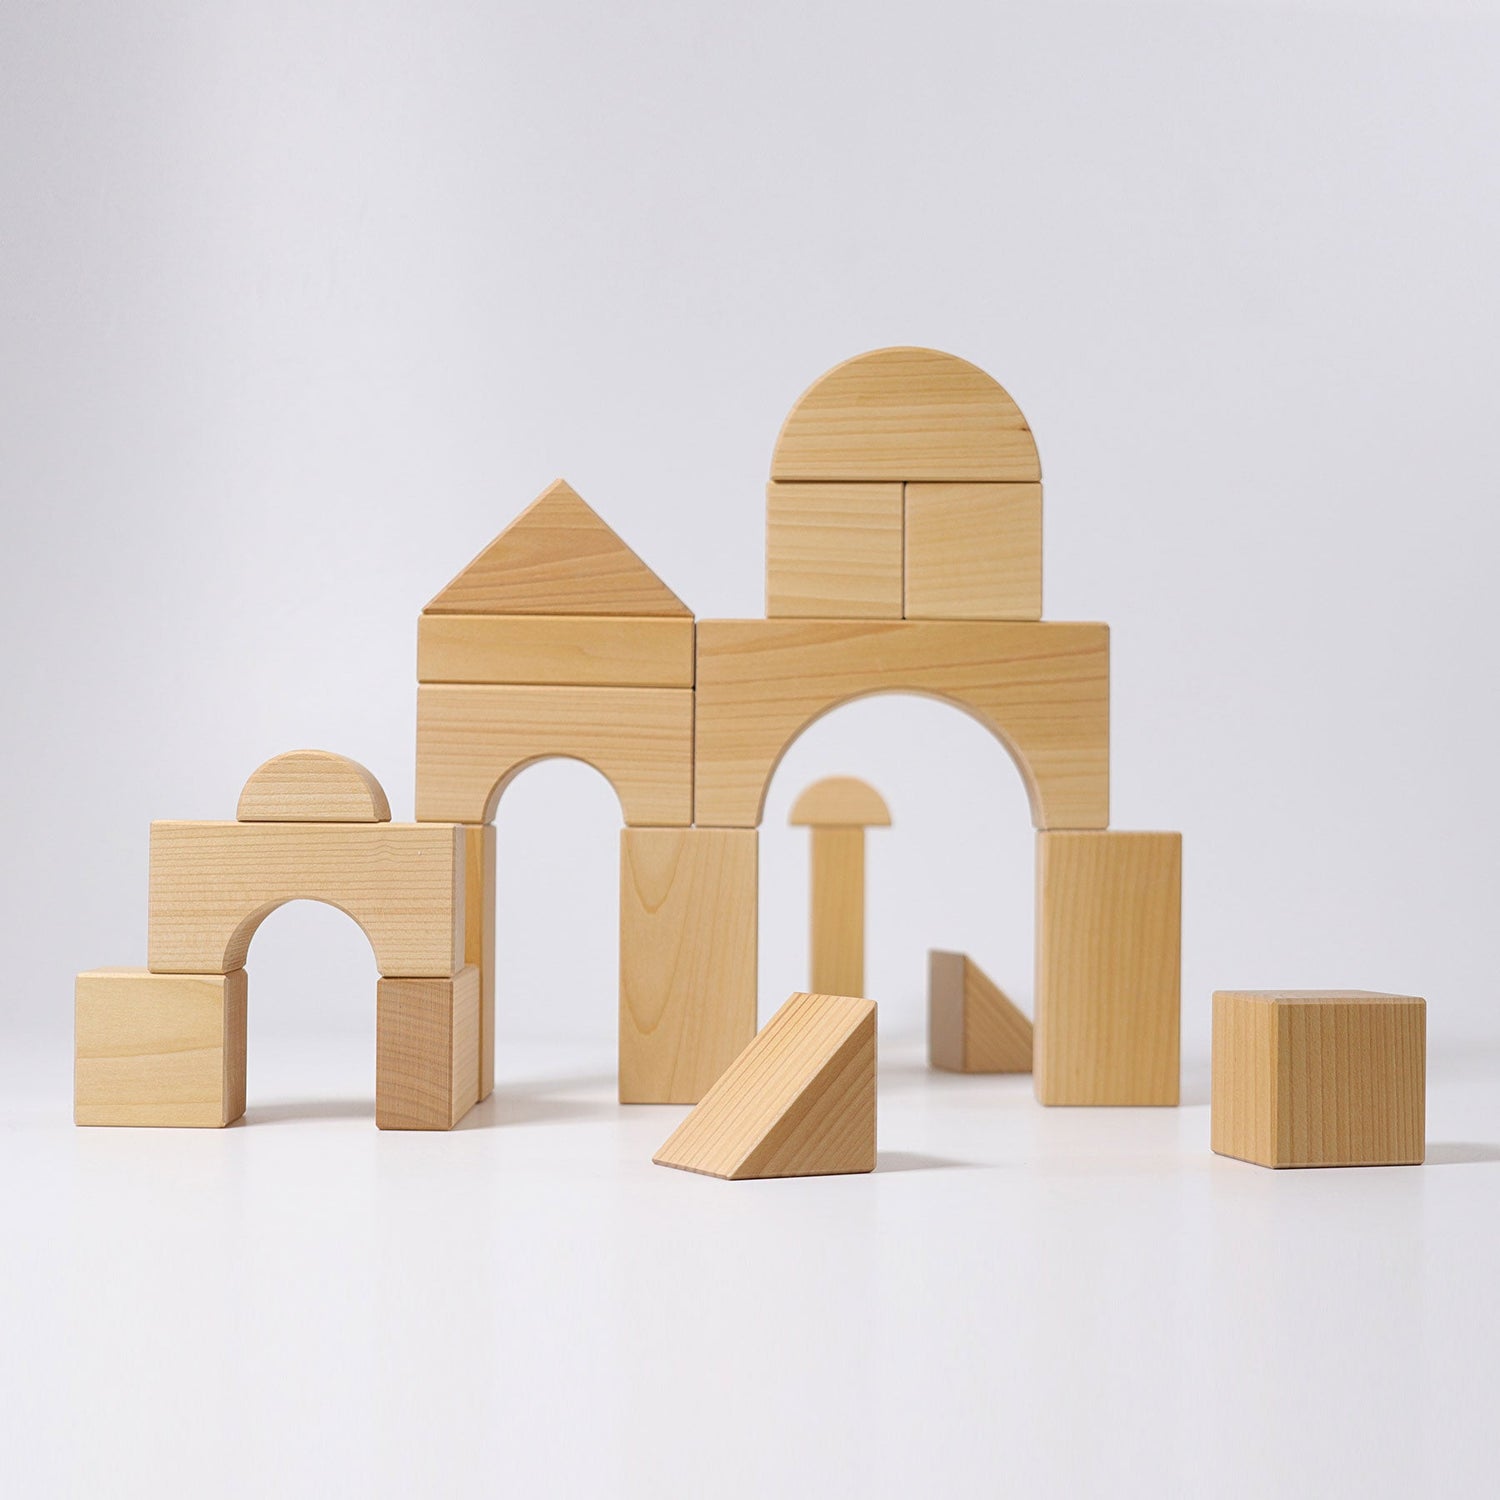 GRIMM'S | GIANT BUILDING BLOCKS by GRIMM'S WOODEN TOYS - The Playful Collective